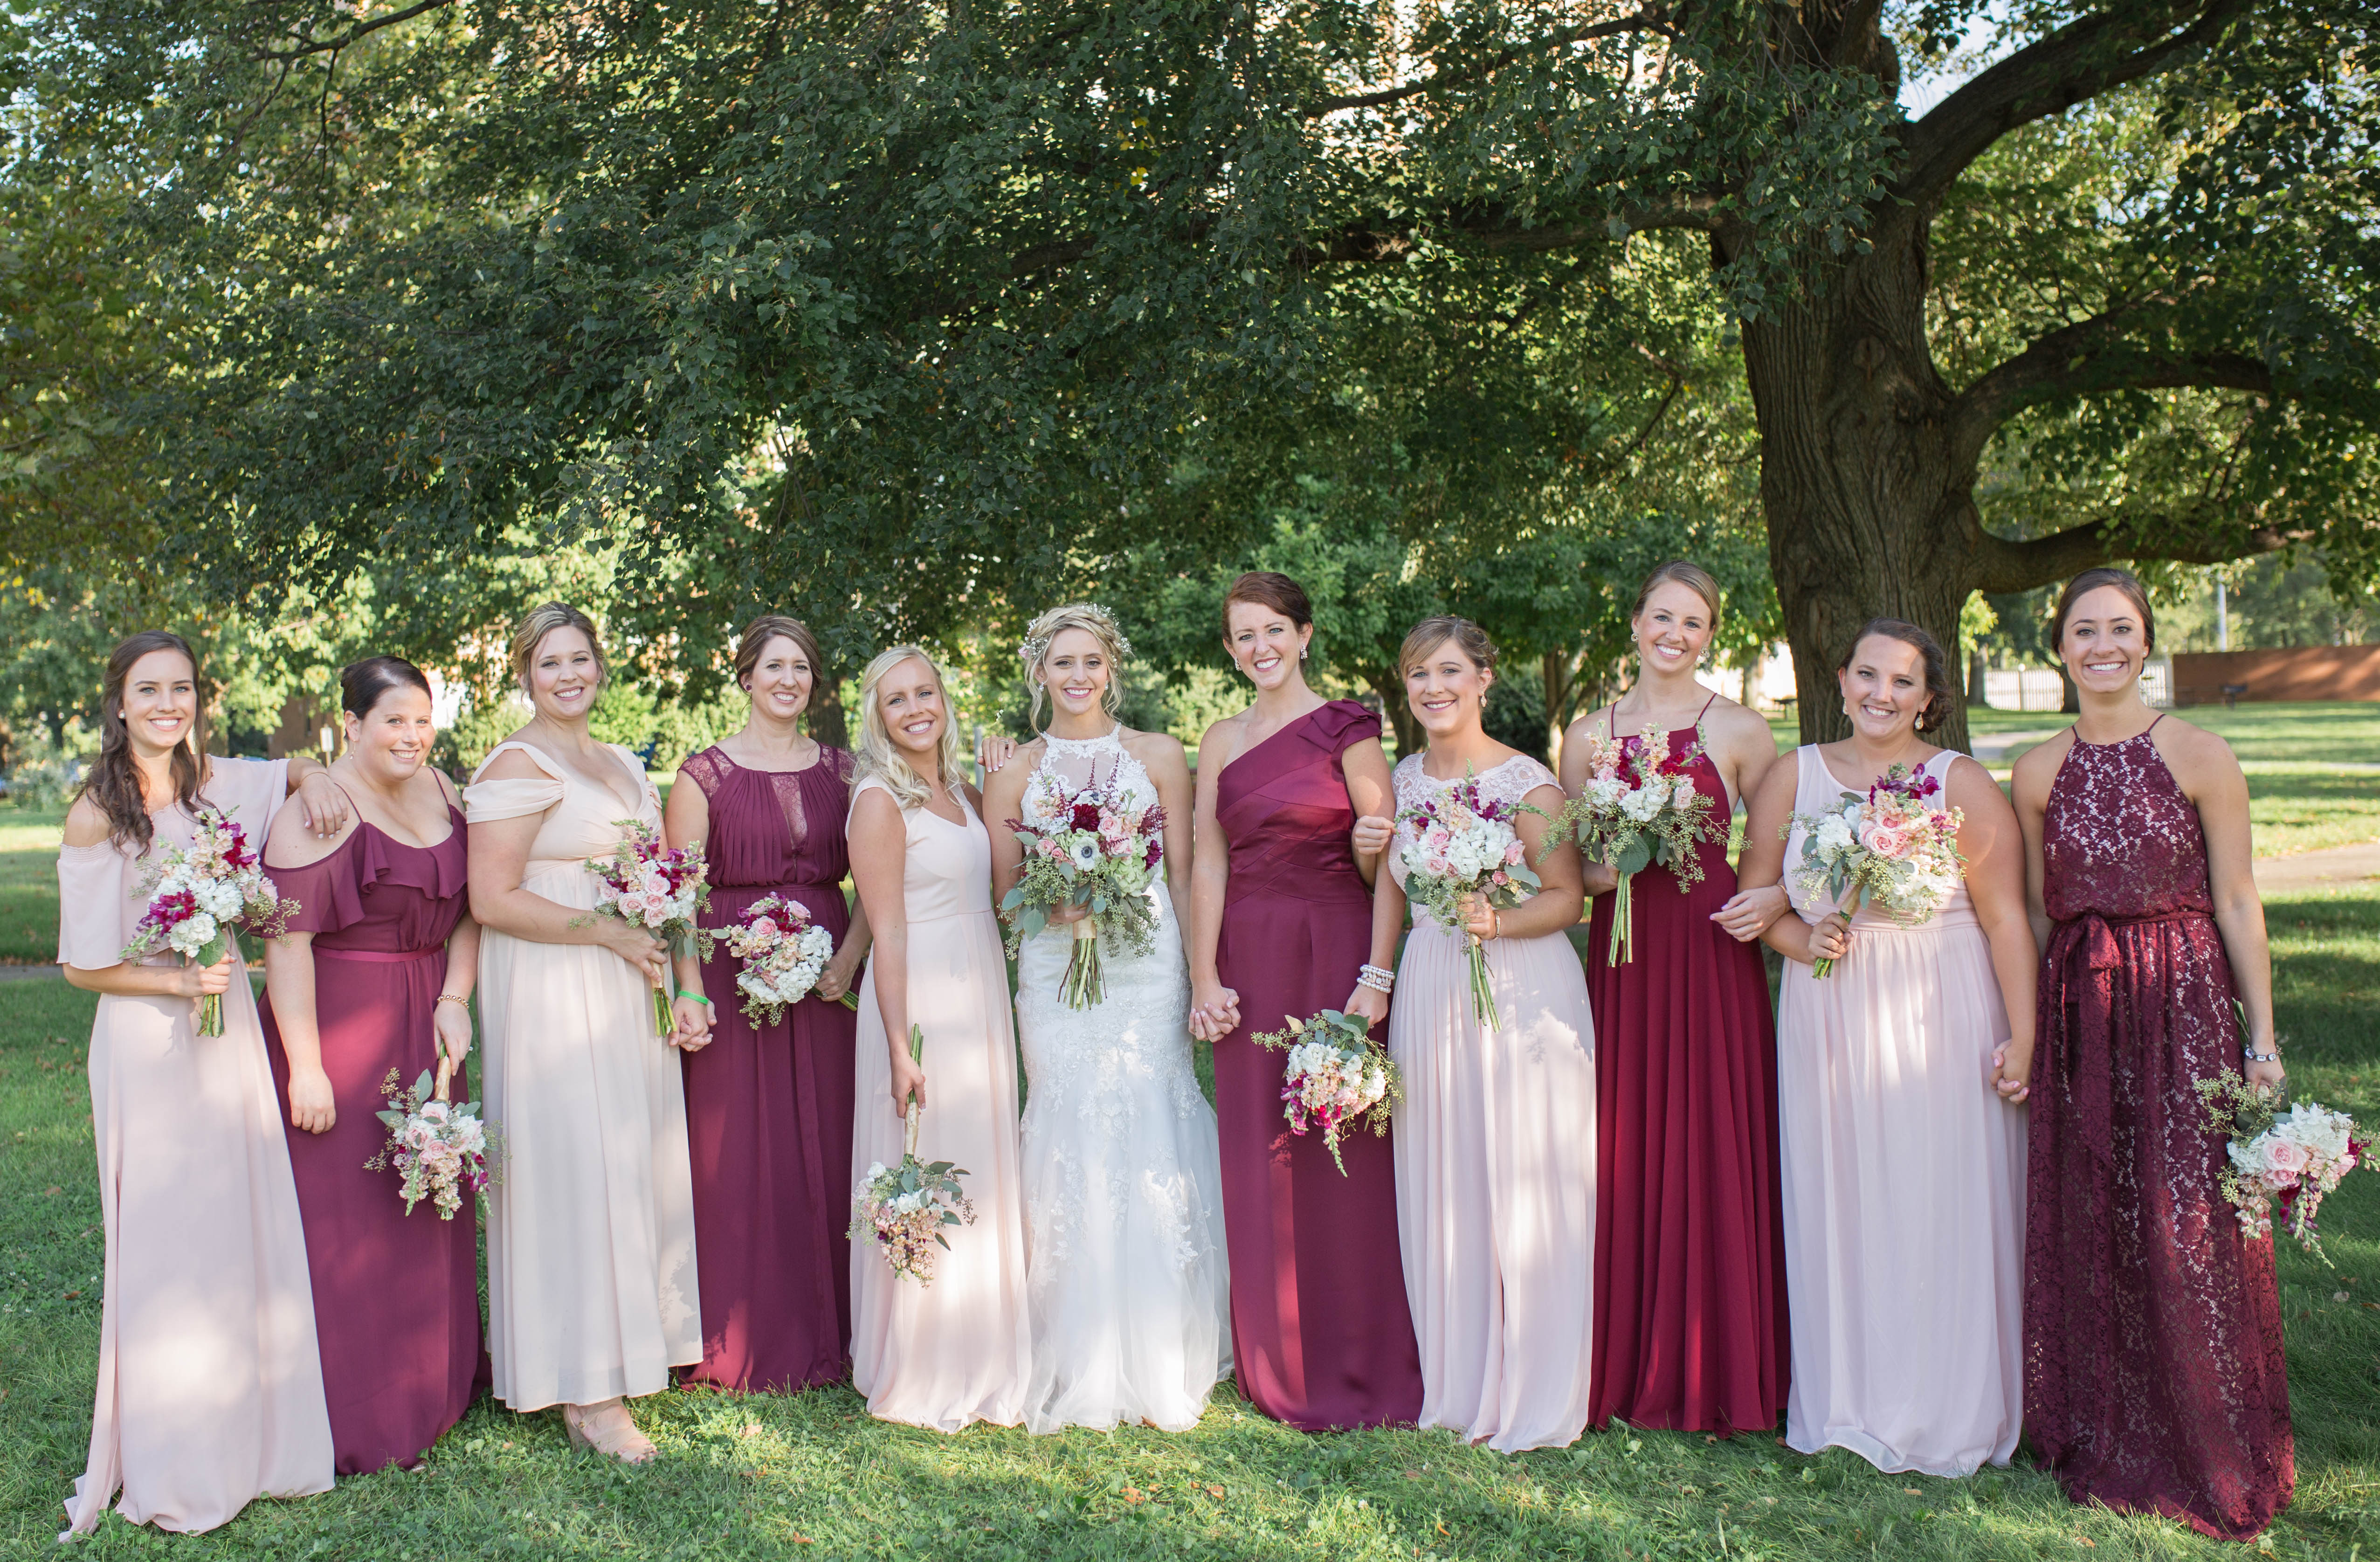 Tips for finding your Bridesmaid's Dresses | Monica Brown Photography | monicabrownphoto.com